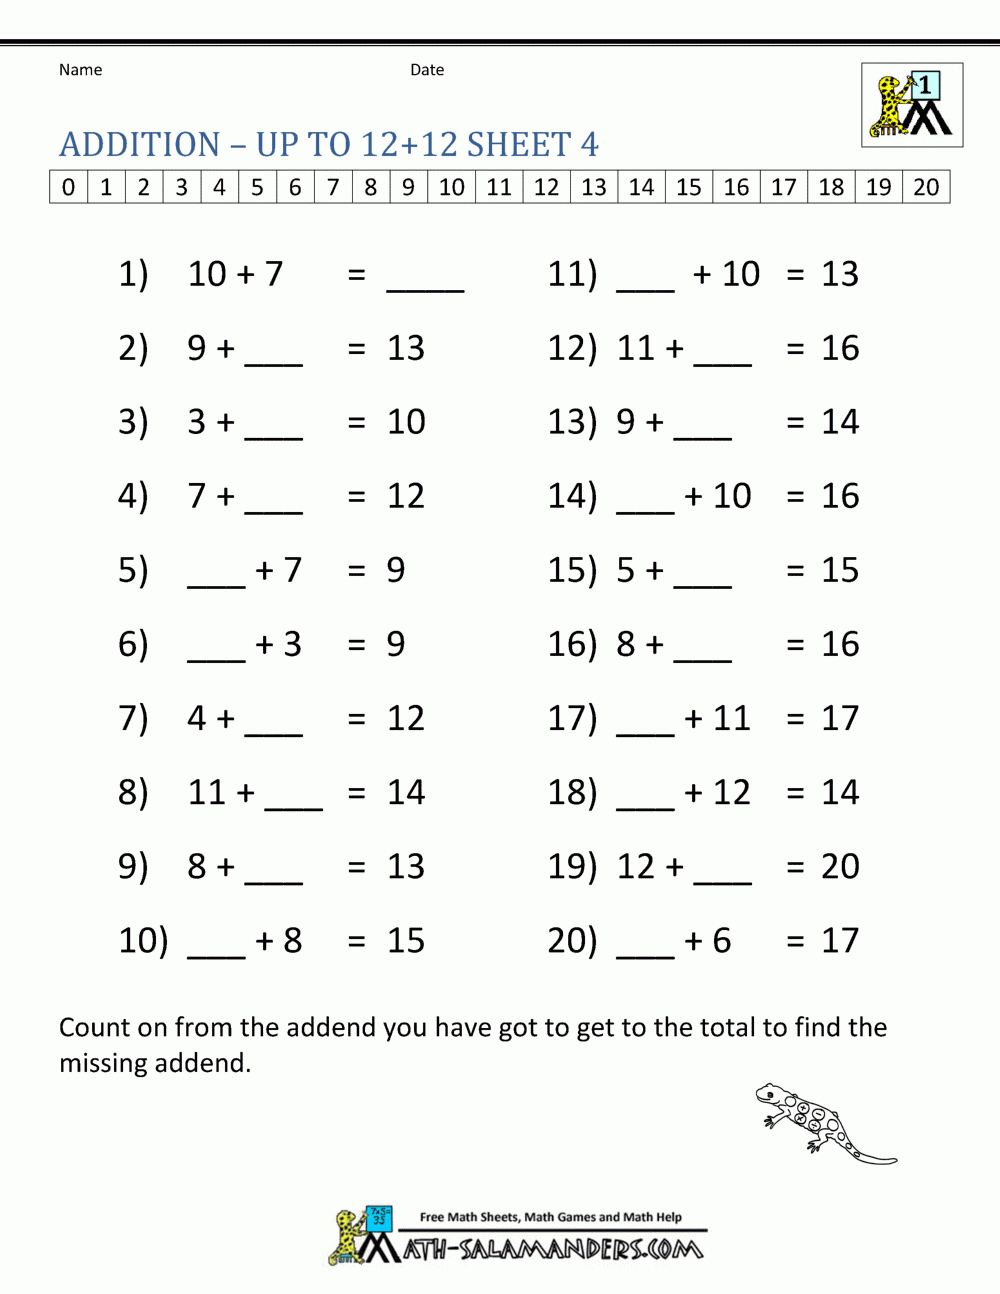 Learning Addition Facts Worksheets 1St Grade - Free Printable Addition Worksheets For 1St Grade